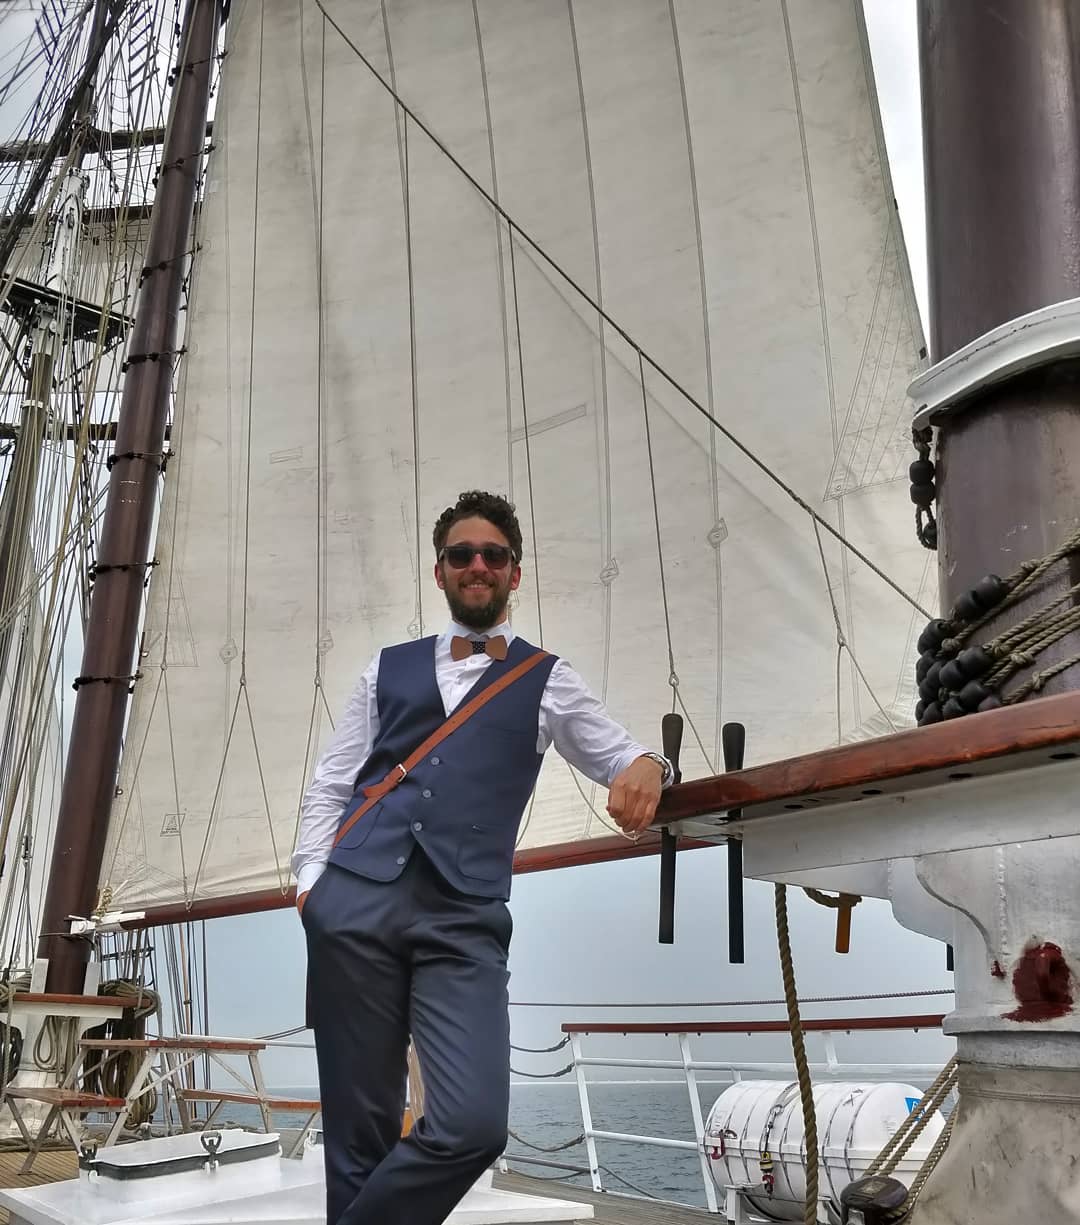 #nowSailing with #style #sailingWithStyle